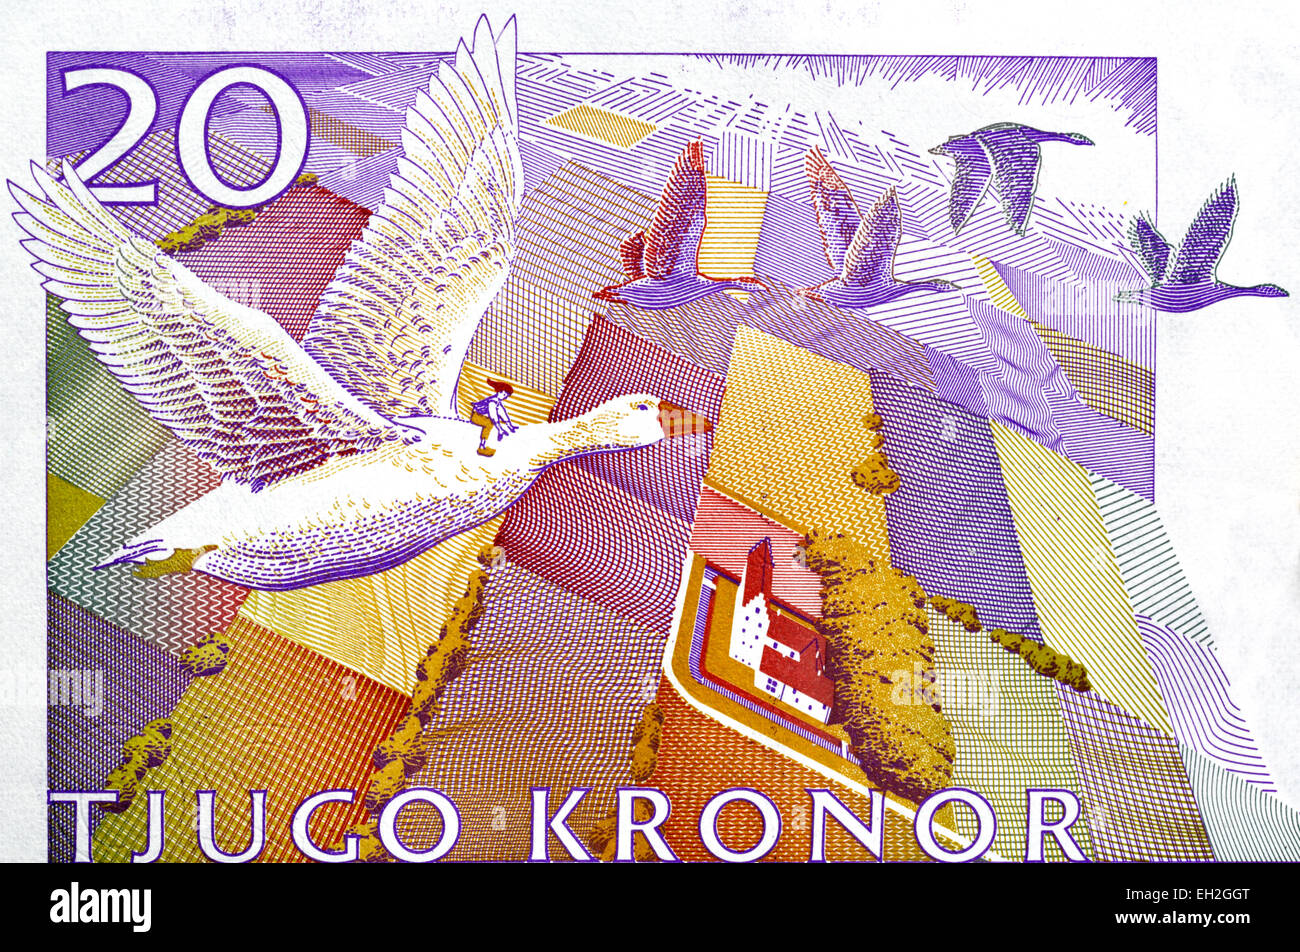 Nils Holgersson flying over Scania from 20 kronor banknote, Sweden, 2006 Stock Photo